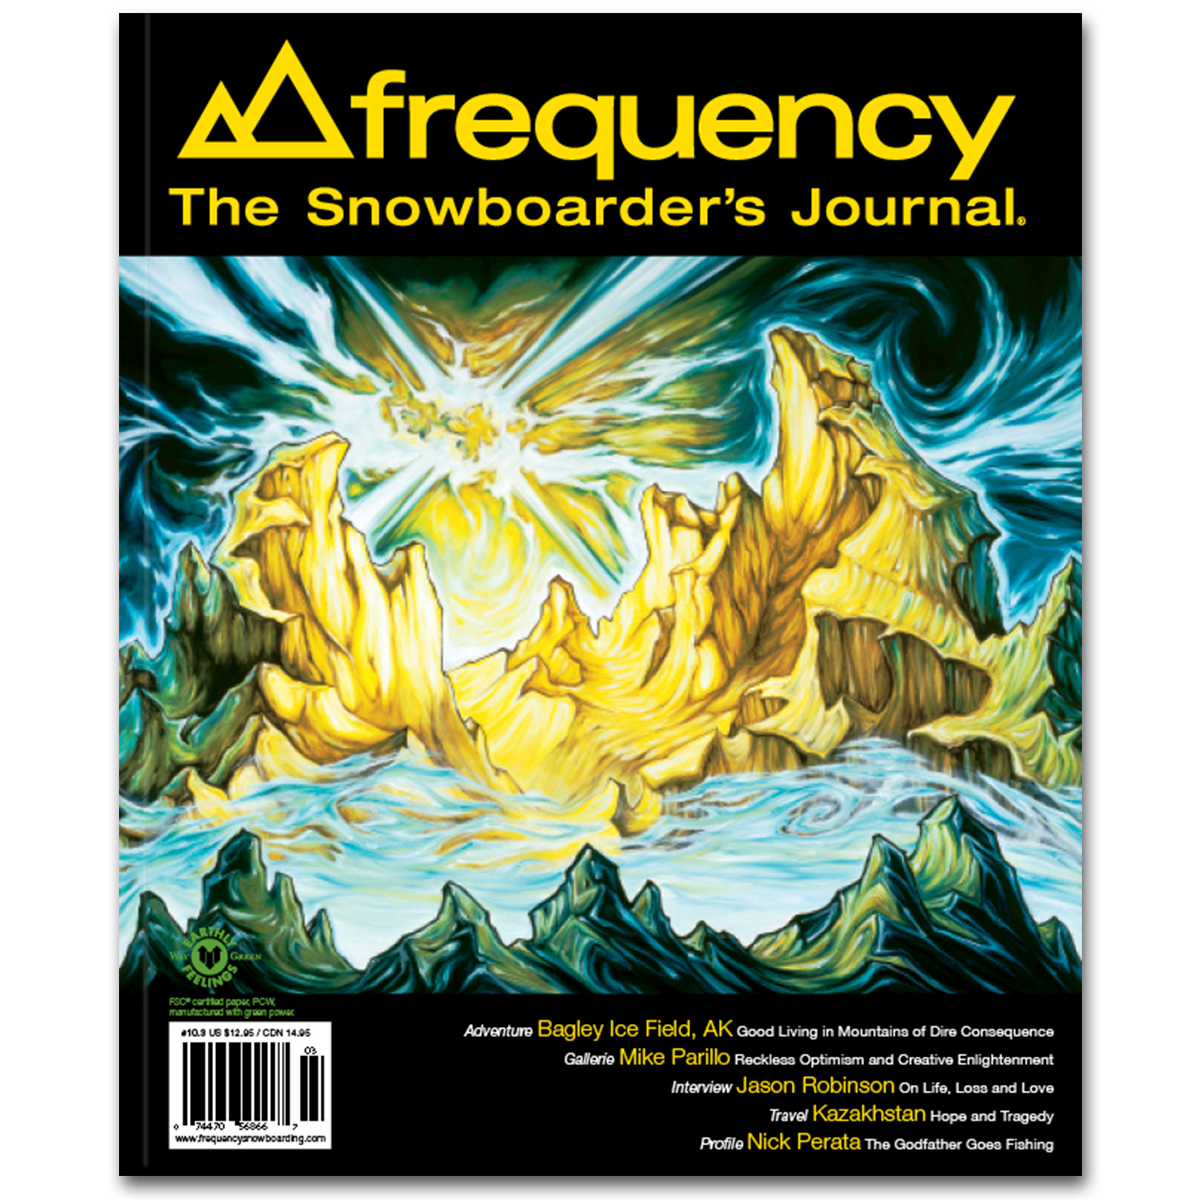 Volume 10 - The Snowboarders Journal